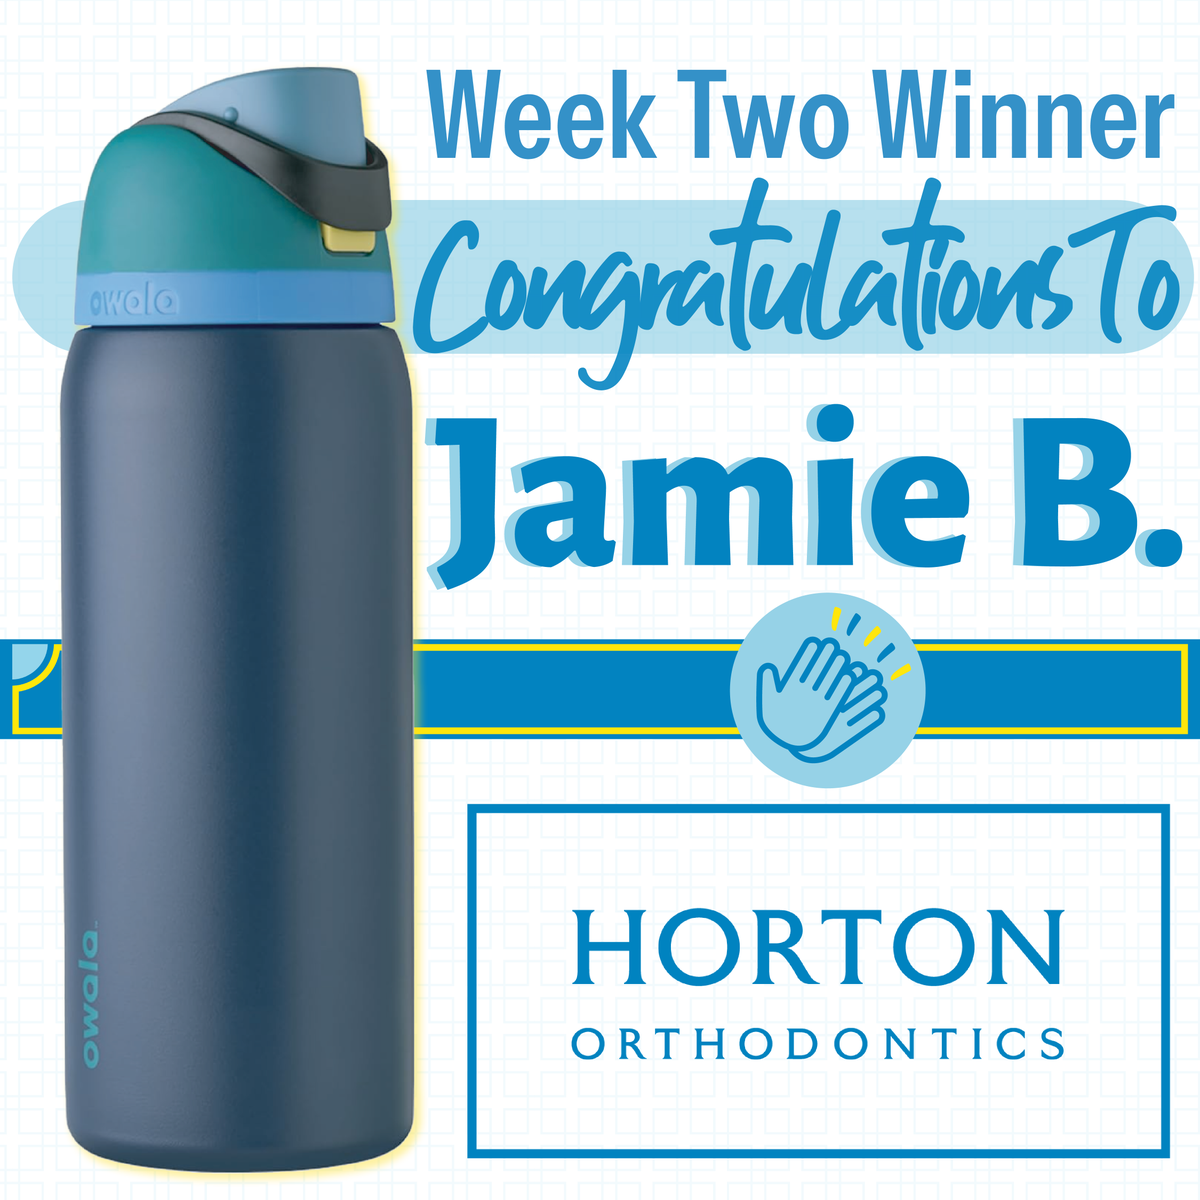 Congratulations to our week two winner, Jamie B.! 👏 We hope you enjoy your new Owala Water Bottle! 💧 Stay hydrated in style this spring! 🤩

#Winner #Congratulations #Contest #Orthodontist #WoodburyMN